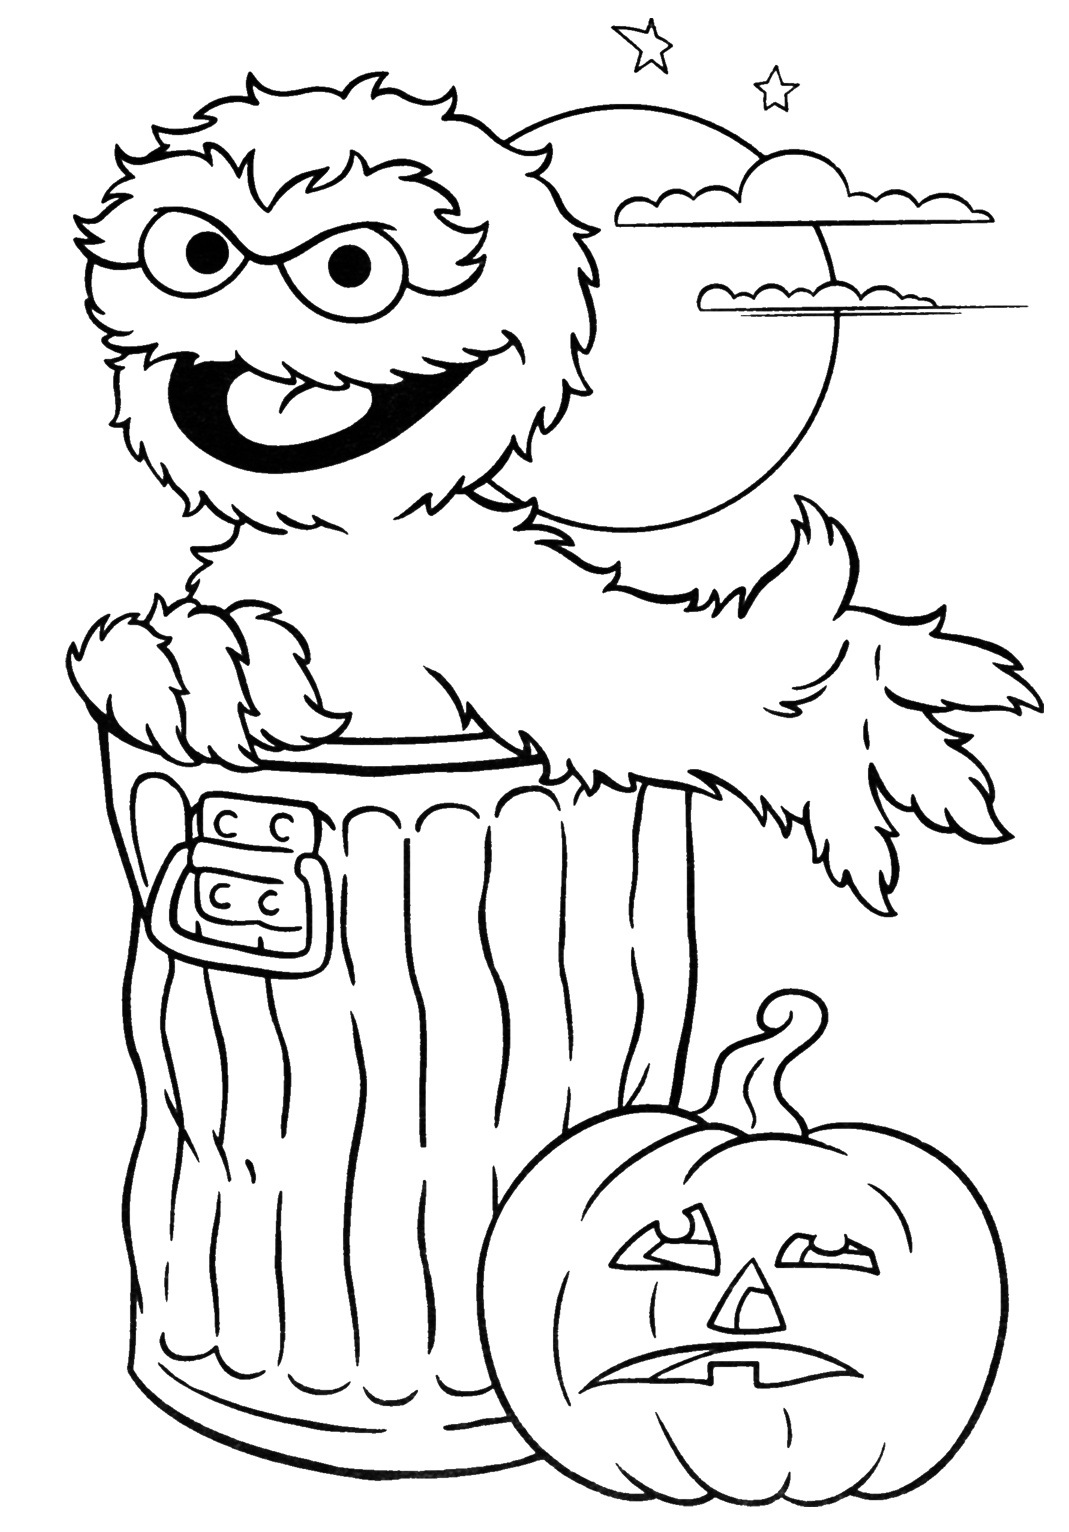 Halloween Printable Pictures To Color